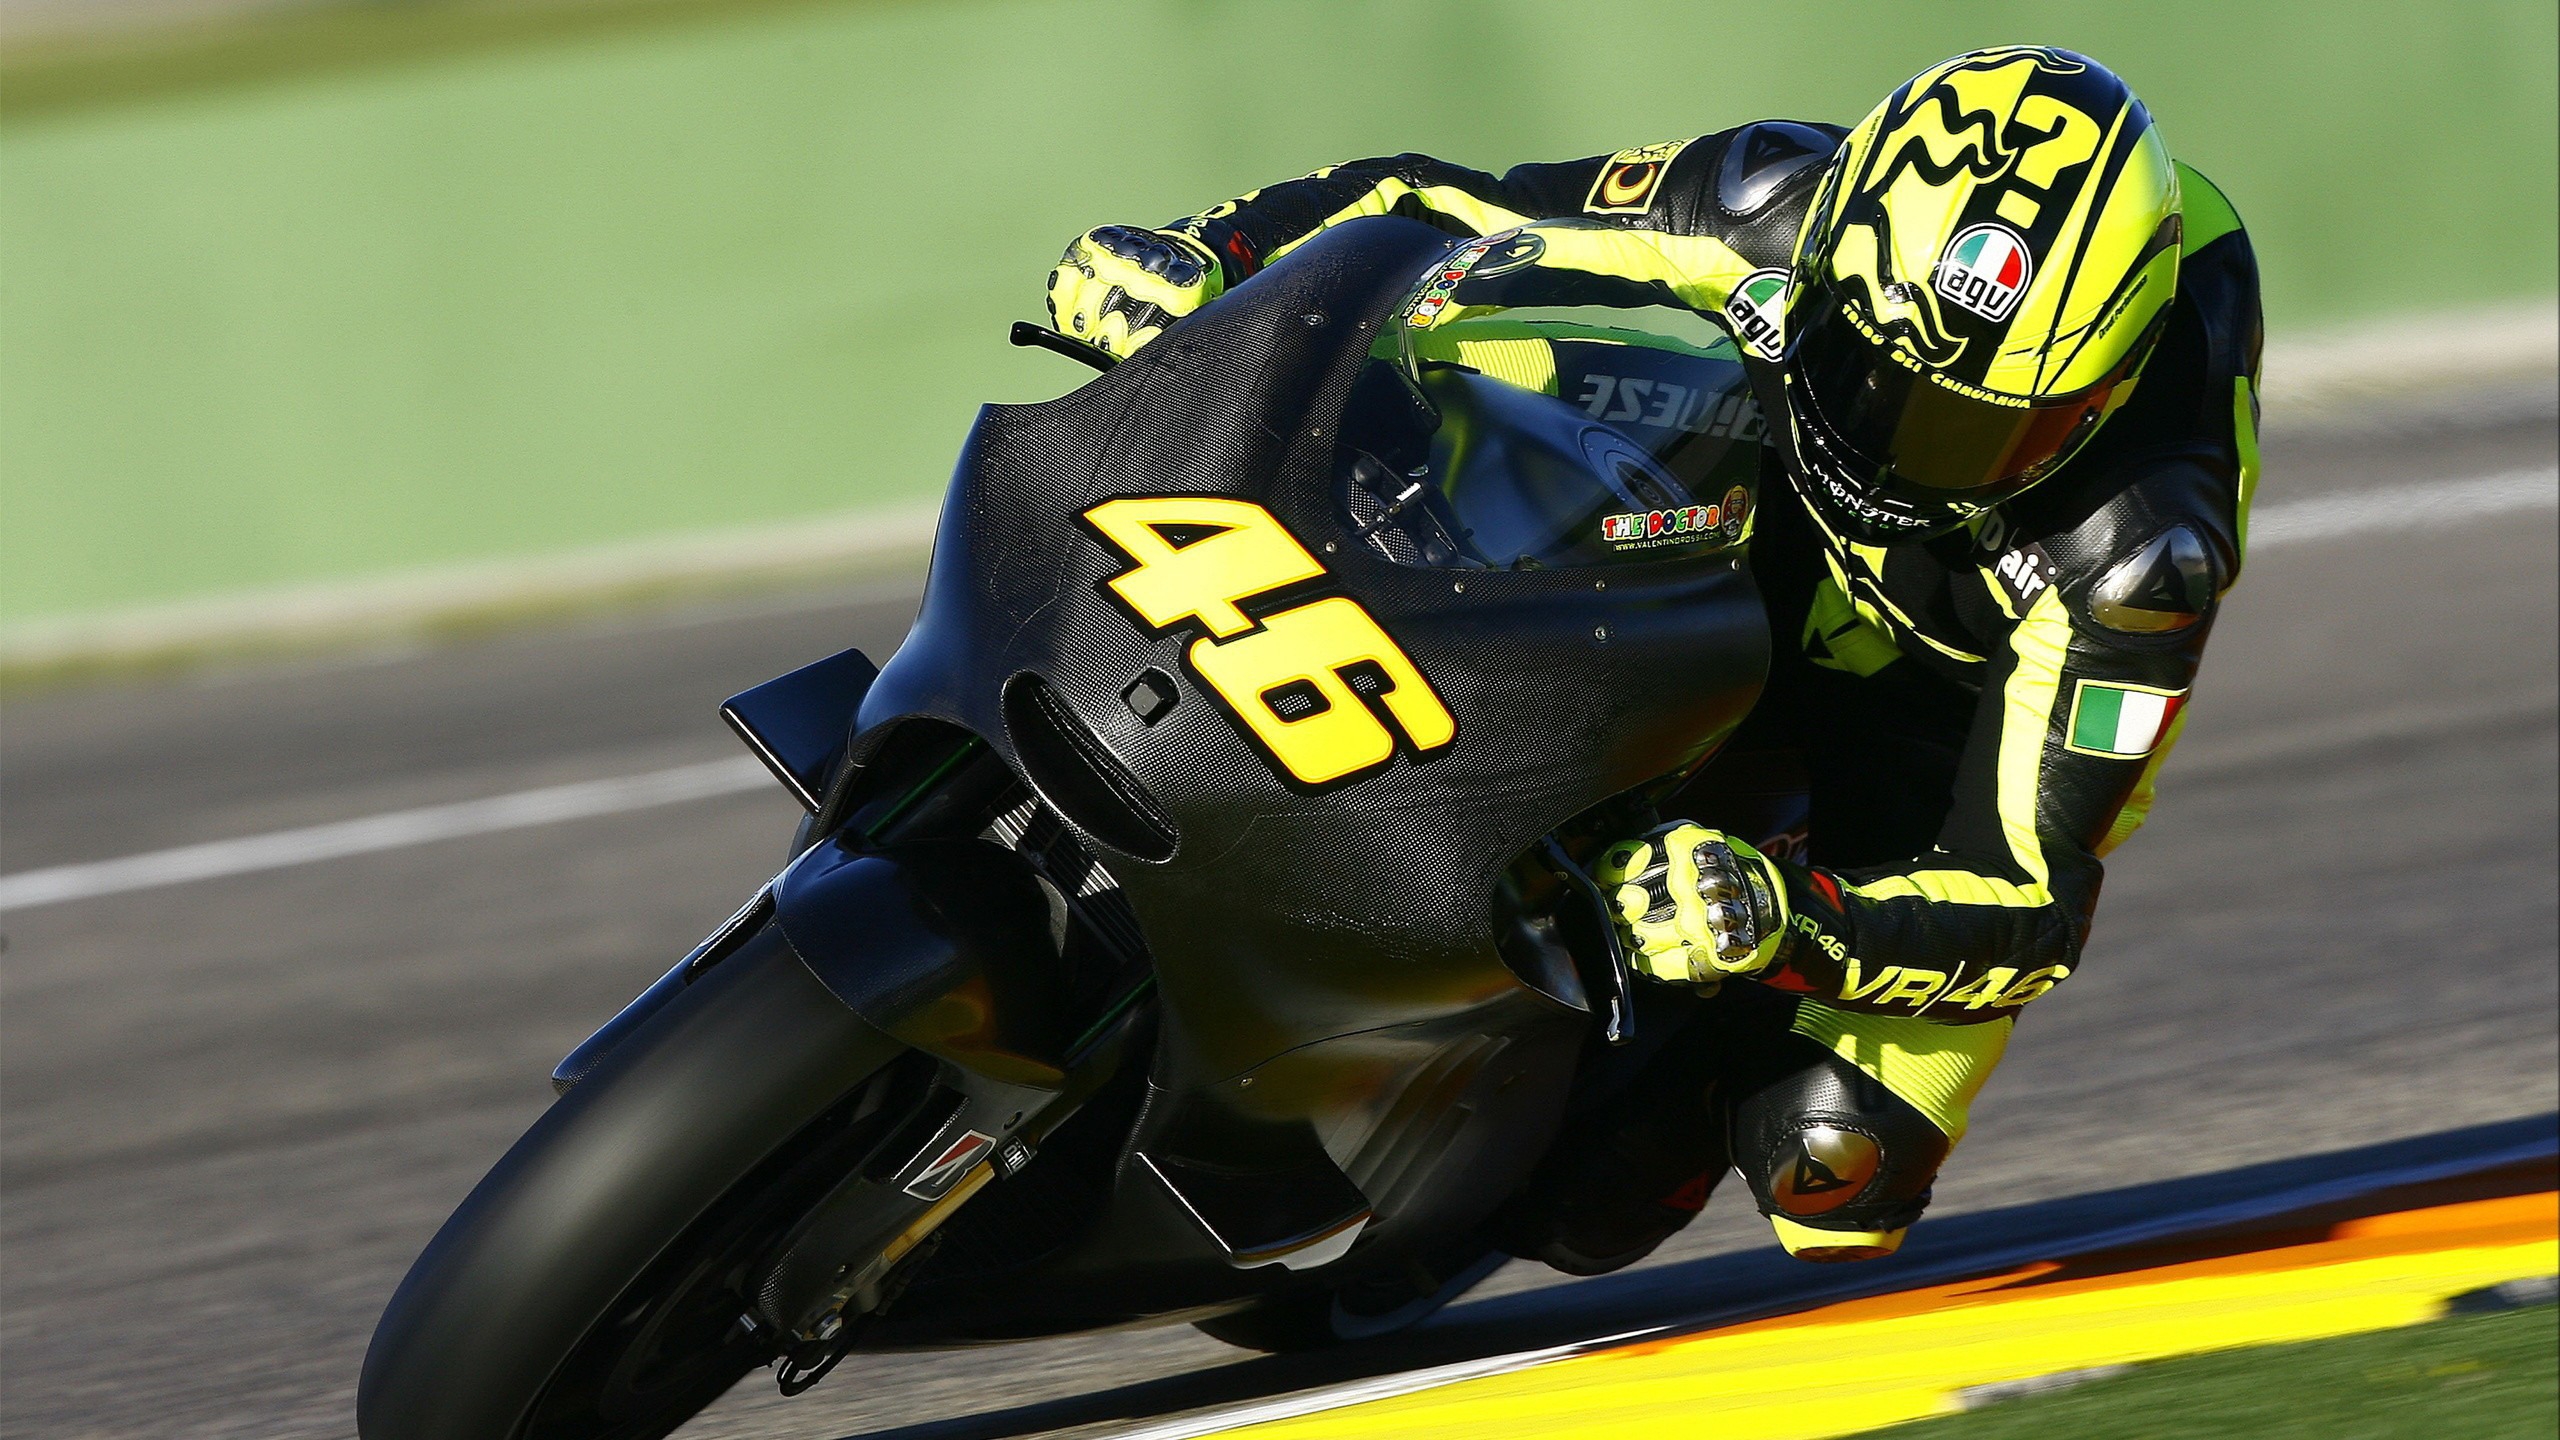 VR46 Racing for 2560x1440 HDTV resolution